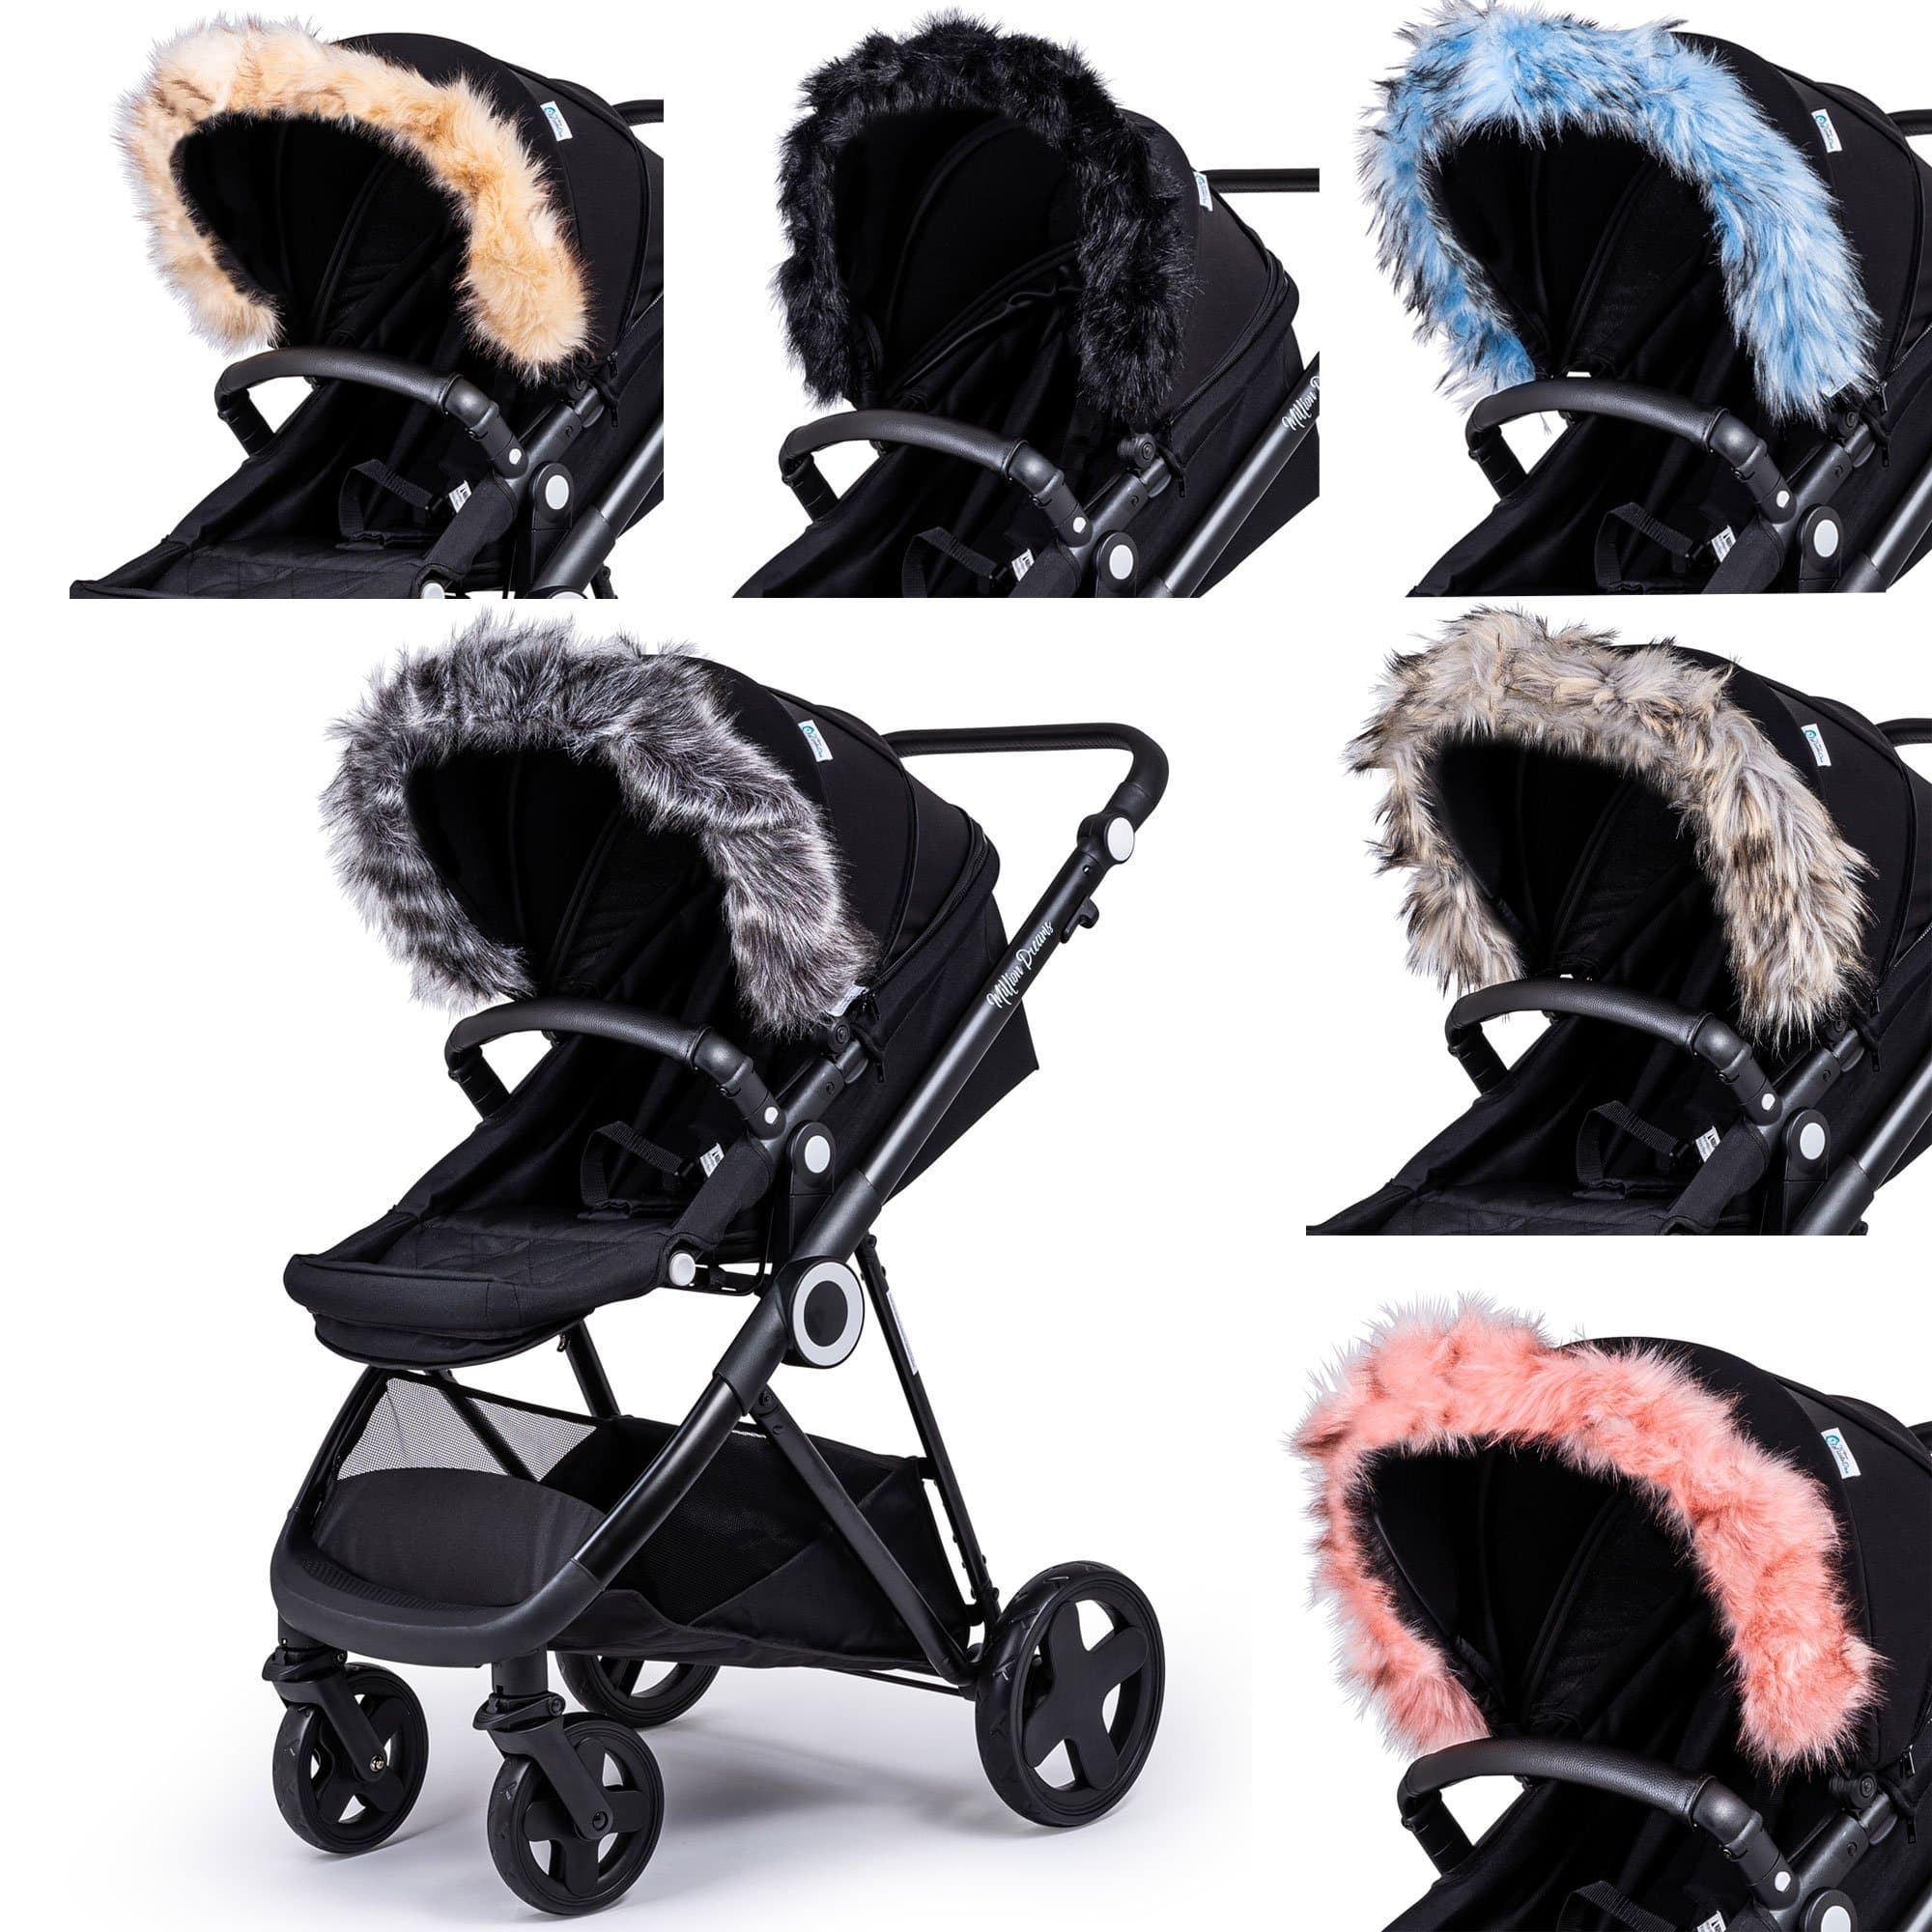 Pram Fur Hood Trim Attachment for Pushchair Compatible with Urban Detour - For Your Little One